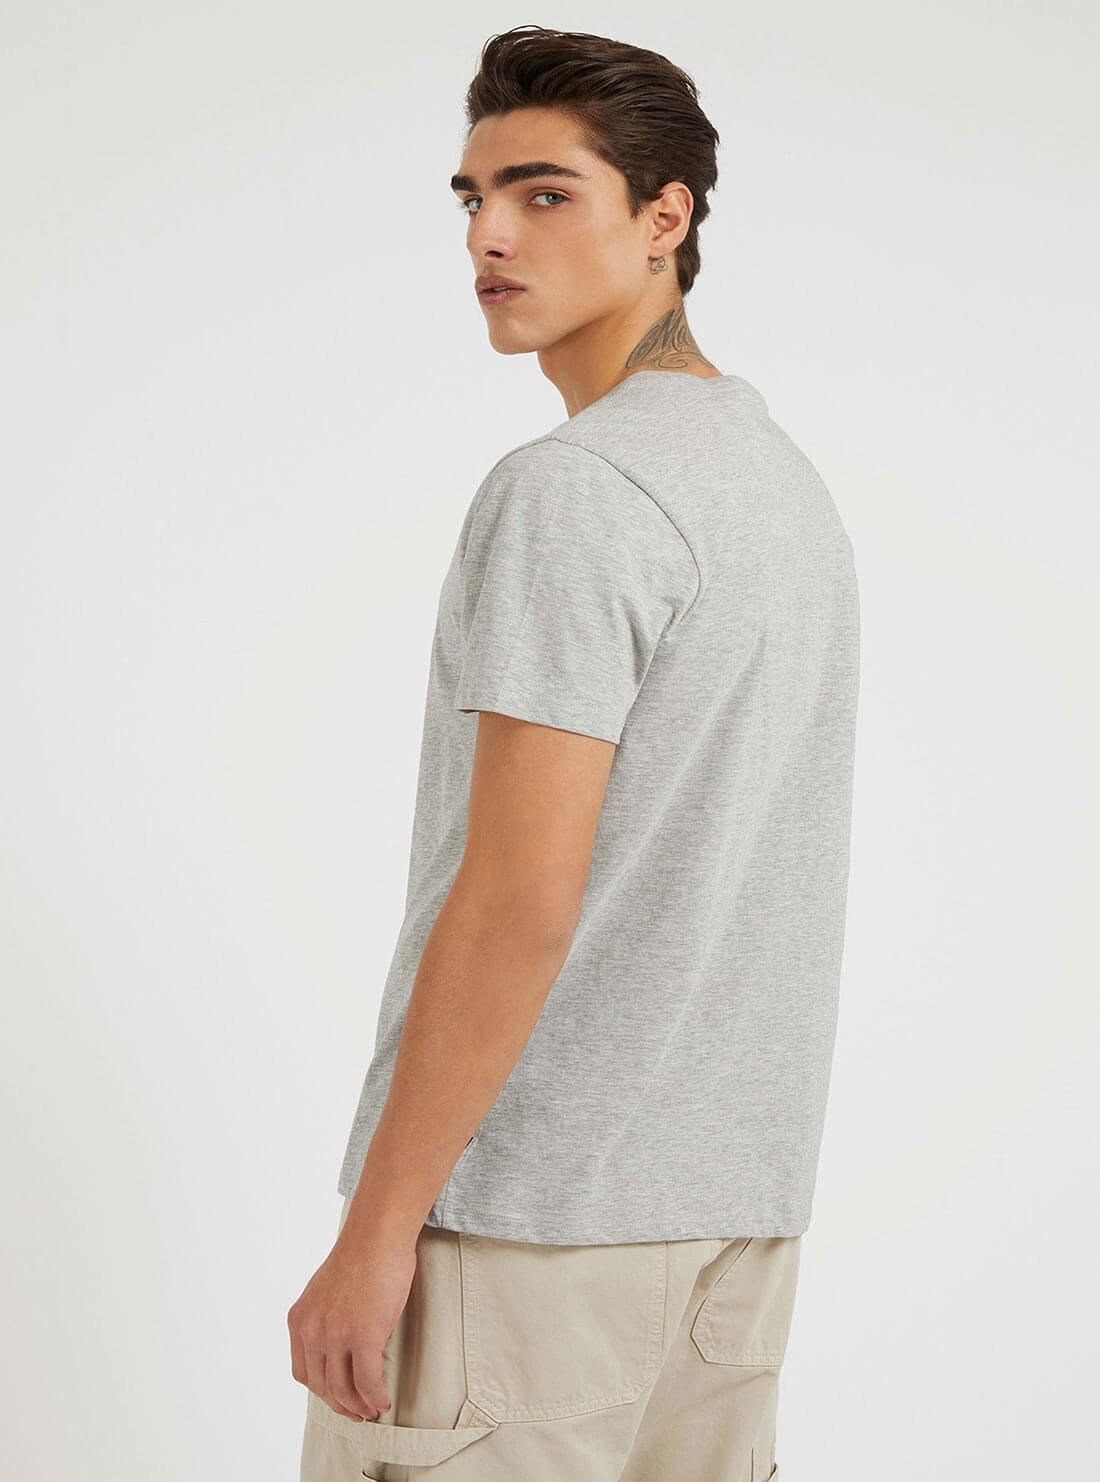 Eco Grey Embroidered Logo T-Shirt | GUESS Men's Apparel | back view